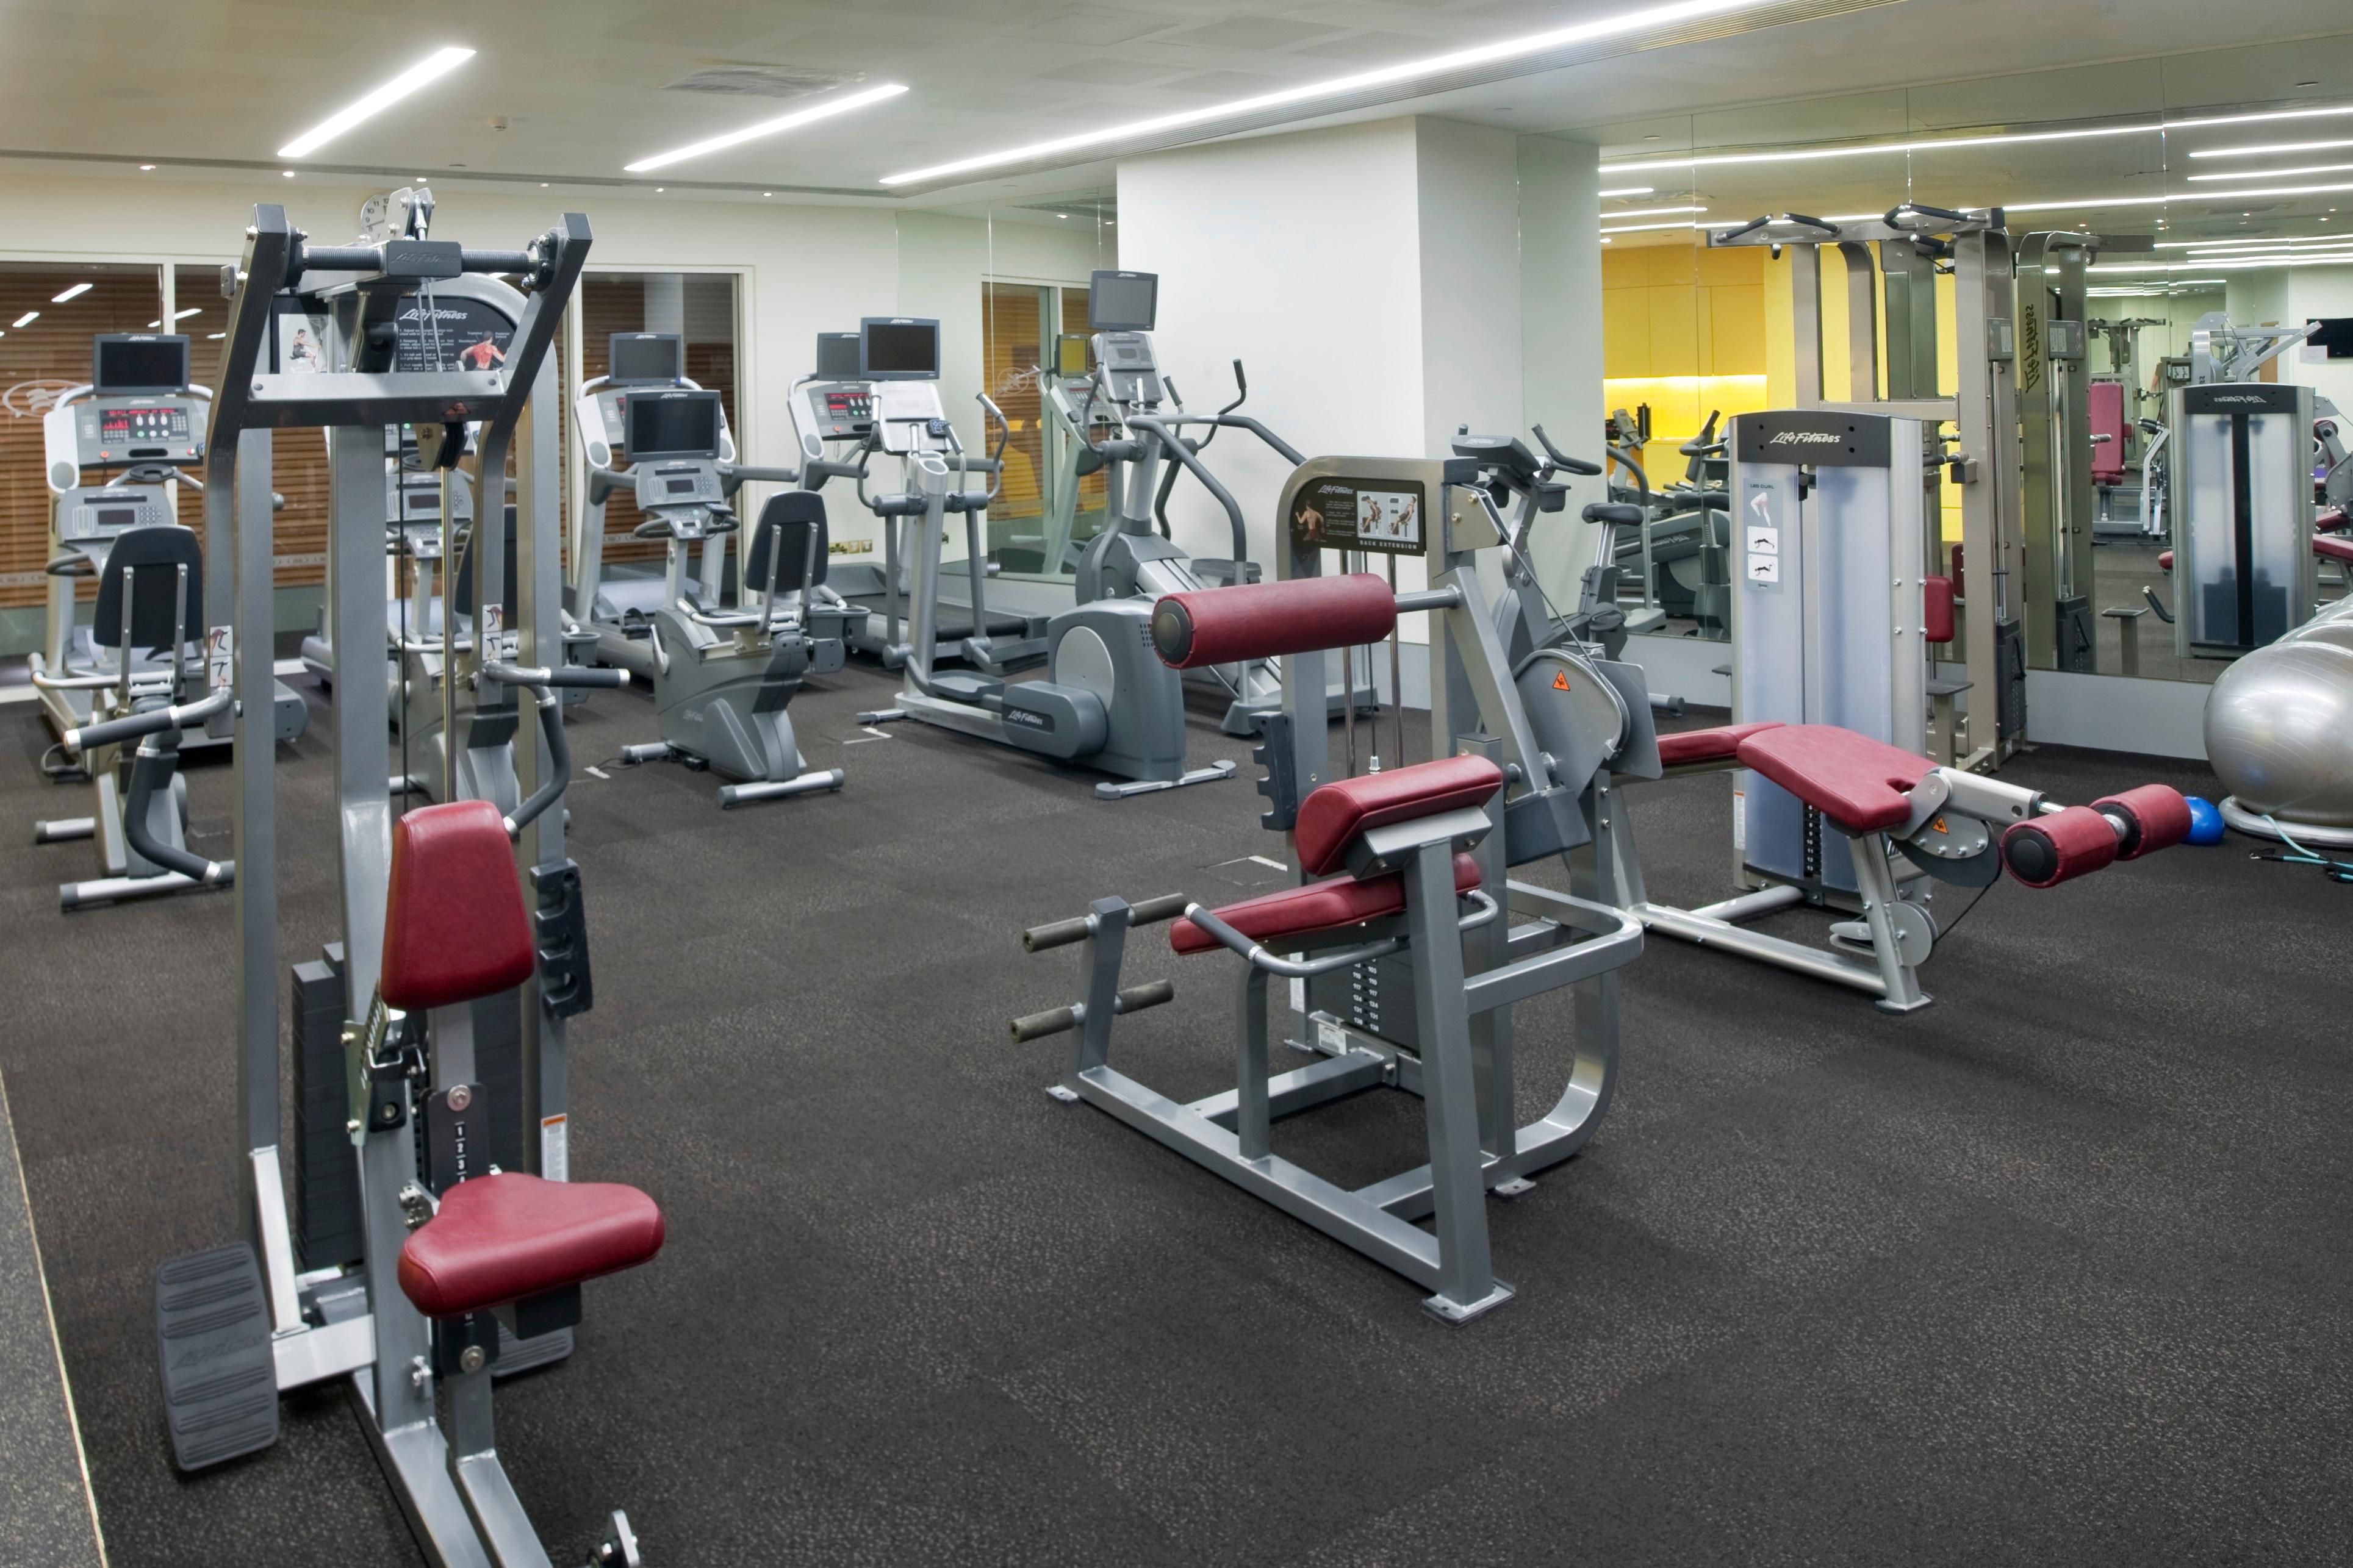 Workout anytime you like with our complete fitness equipment